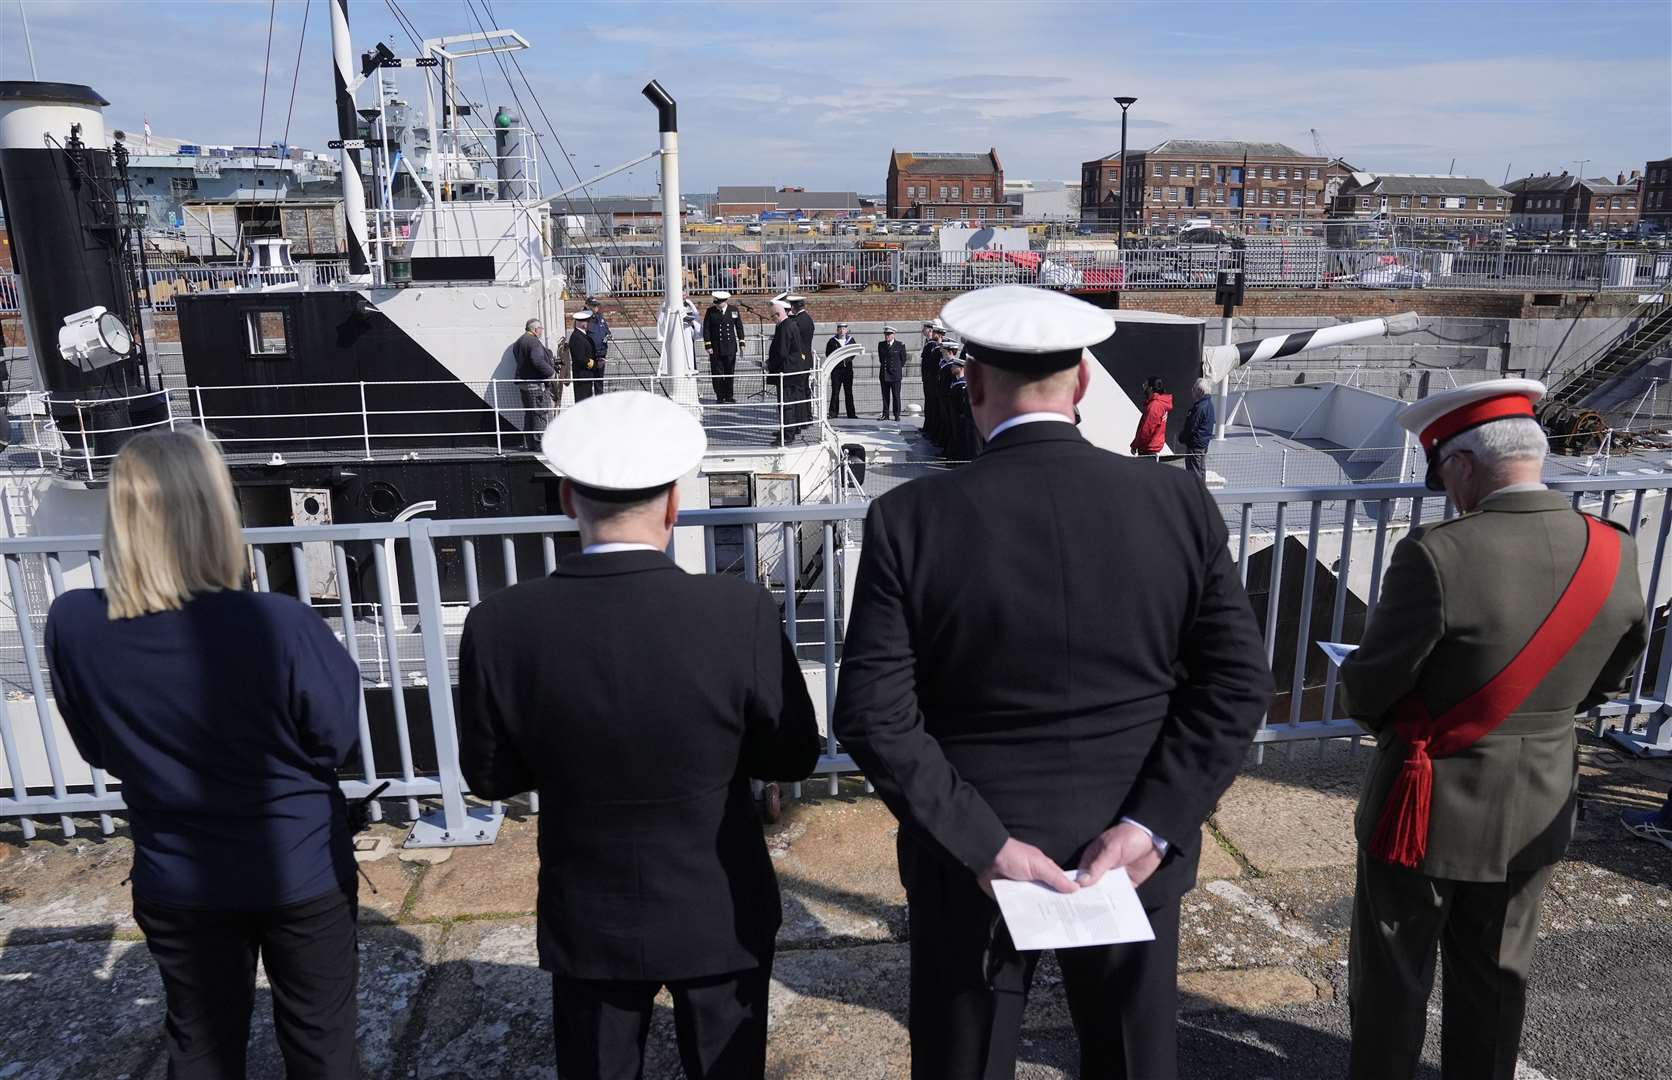 Members of the Royal Navy, Royal New Zealand Navy and Royal Australian Navy take part in an Anzac Day service of remembrance on board HMS M.33 at Portsmouth Historic Dockyard (Andrew Matthews/PA)